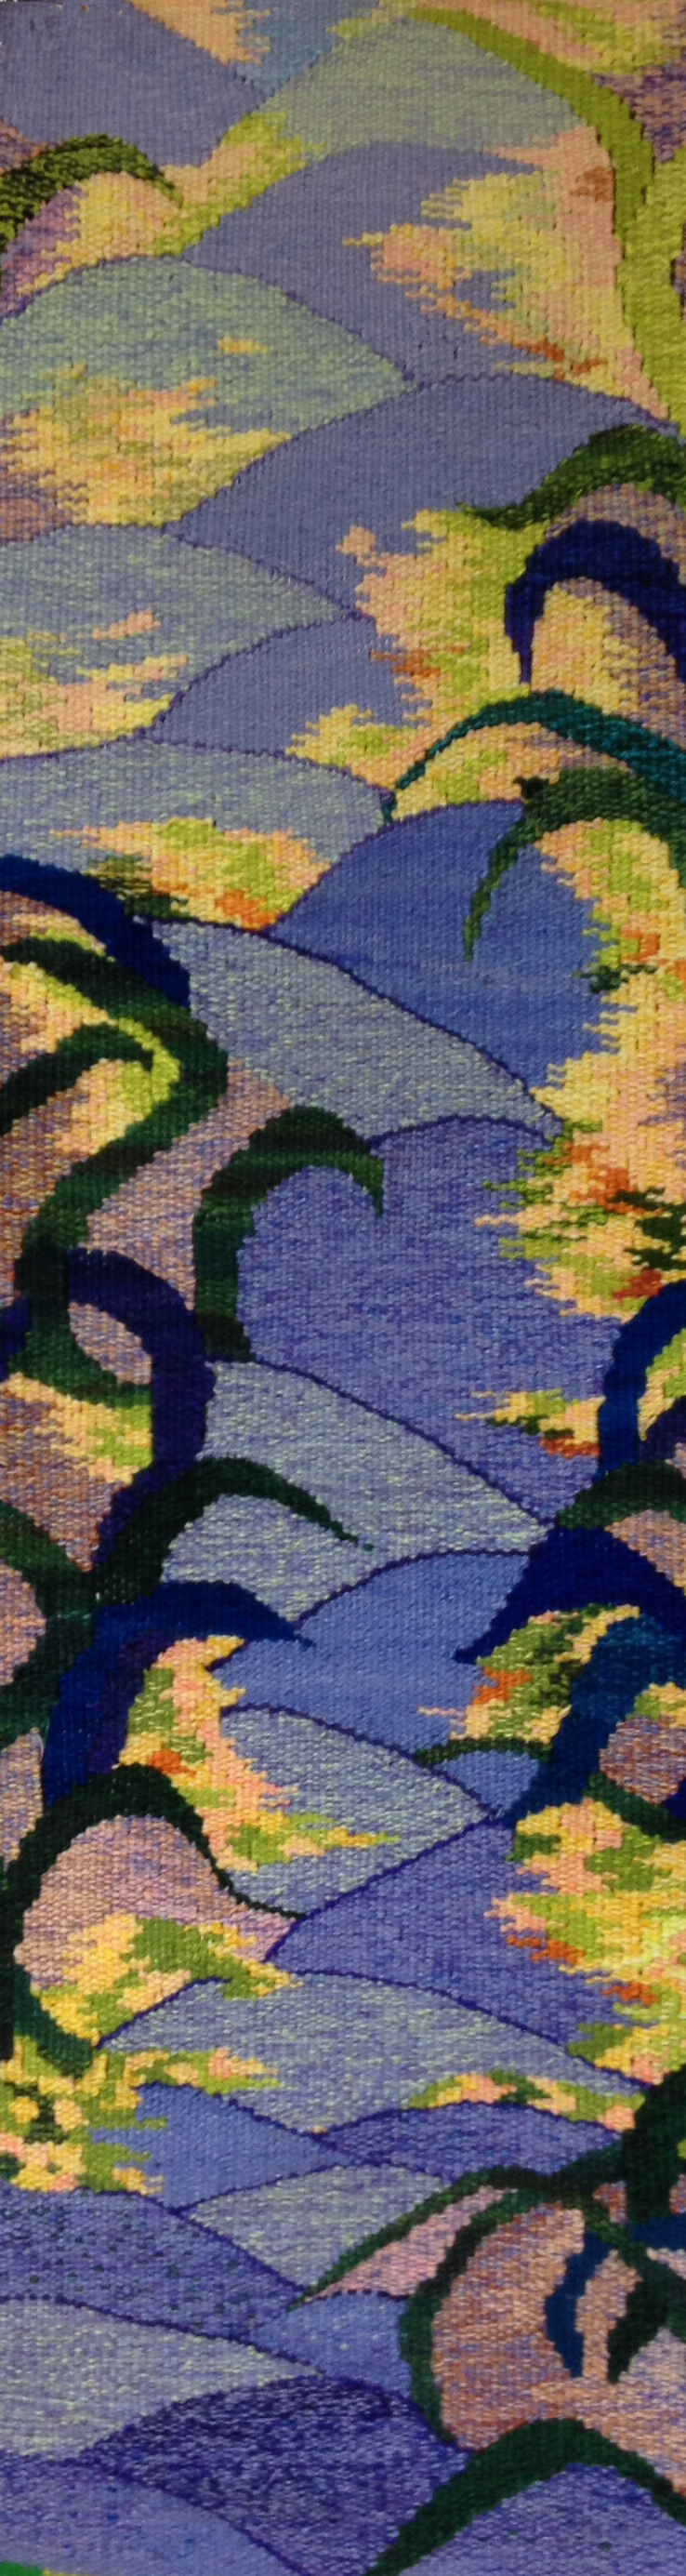 Joan Griffin Tapestry Blog | Joan Griffin Tapestry